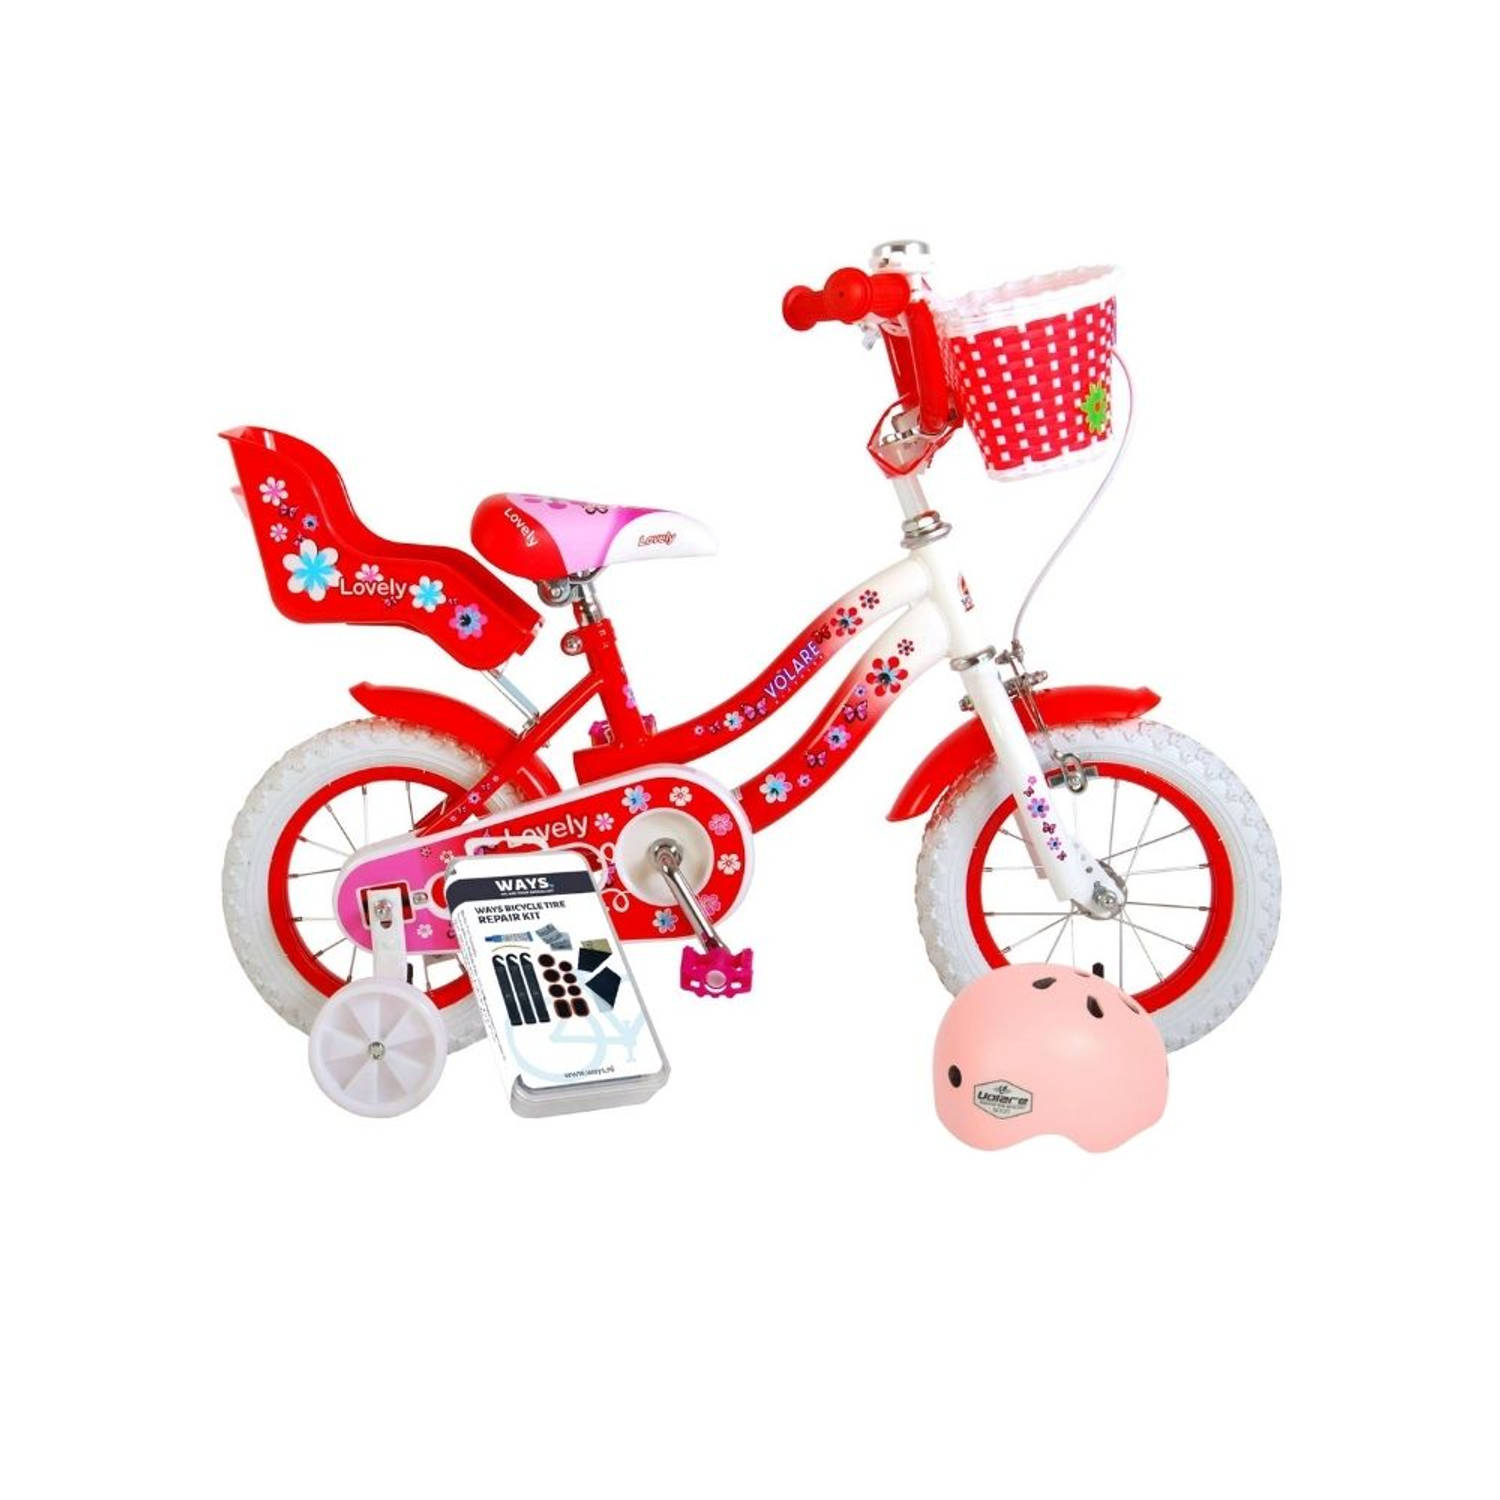 Volare Kinderfiets Lovely - 12 inch - Rood/Wit - Inclusief fietshelm + accessoires